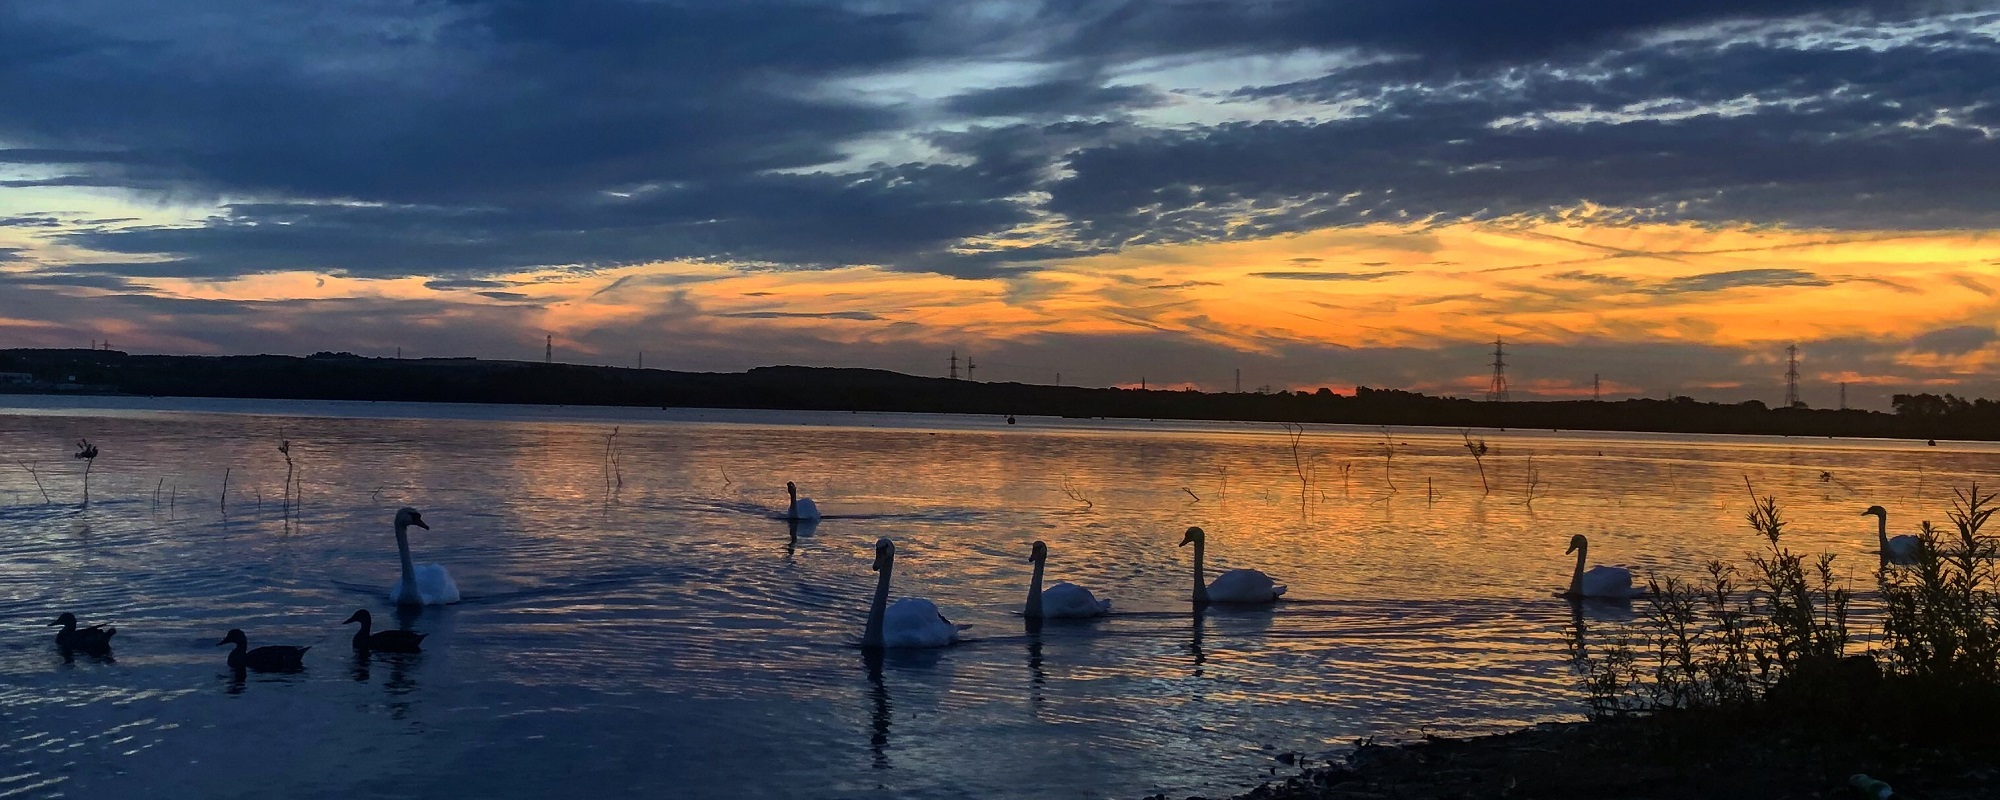 Walsall Lake At Sunset With Swans